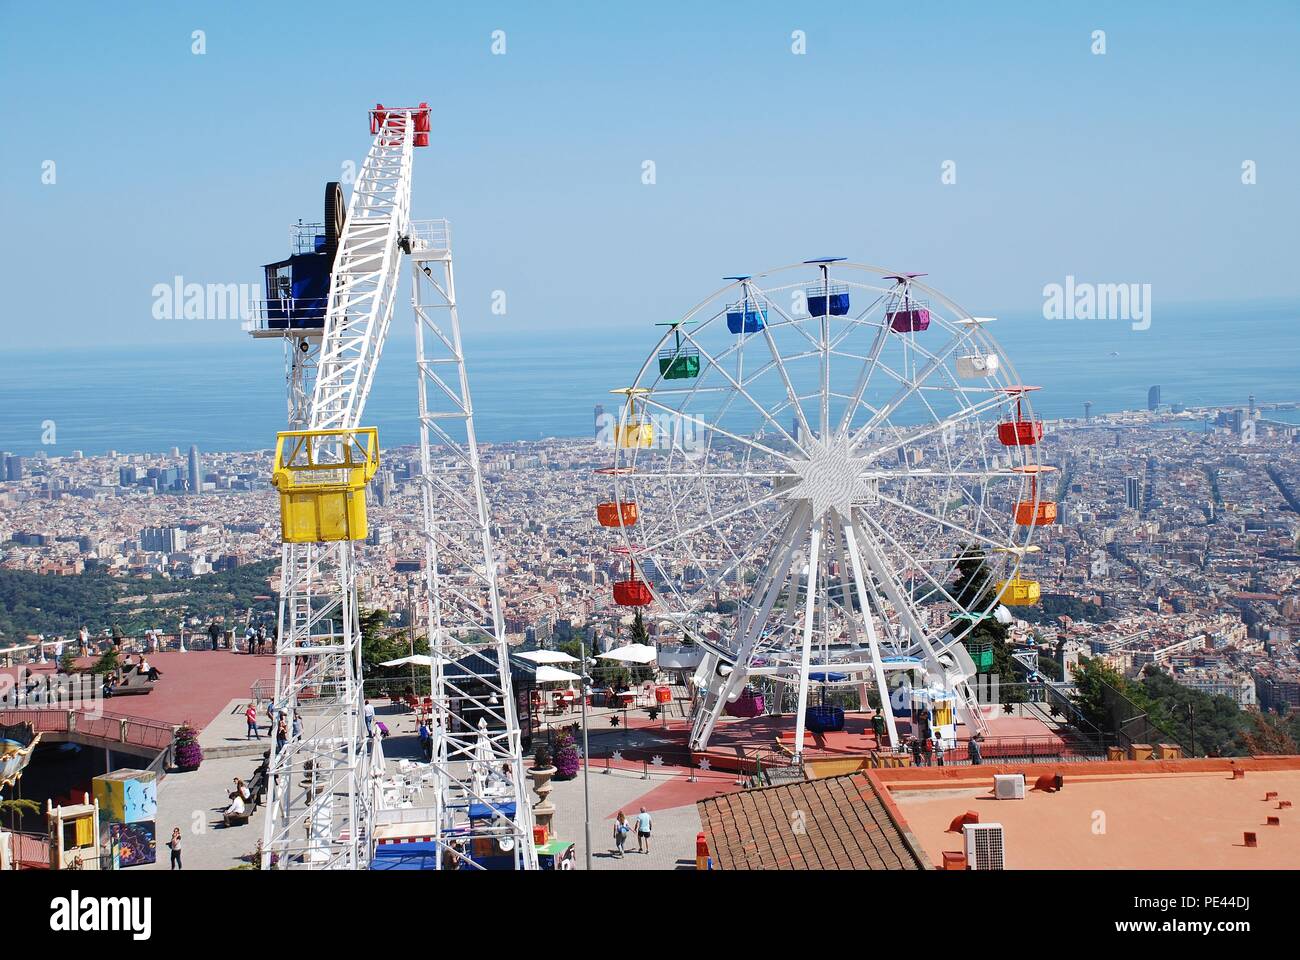 The Tibidabo amusement park on Mount Tibidabo high above Barcelona, Spain on April 18, 2018. The park first opened in 1901. Stock Photo